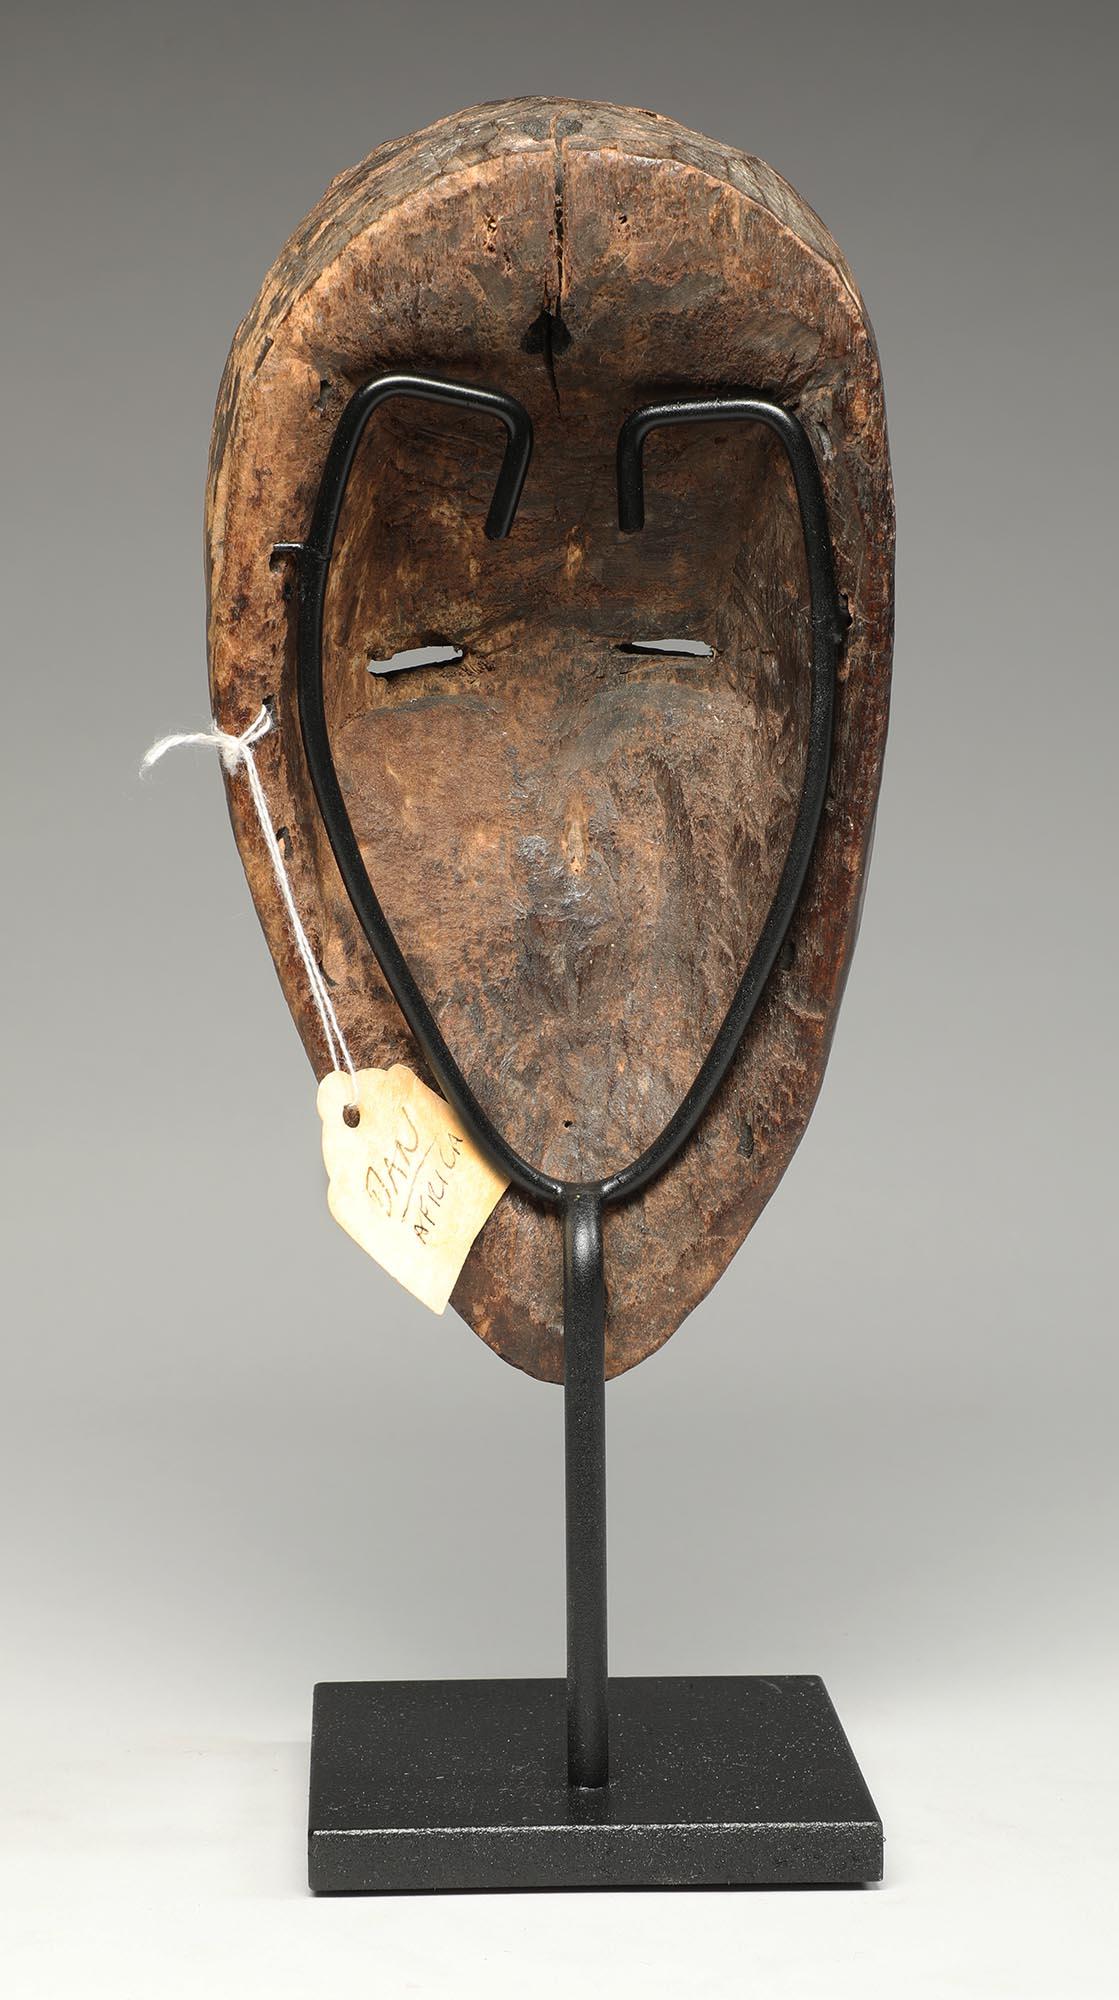 Hand-Carved Small Old Dan Mask Blessed by Age Eroded Side, Cubist Face Liberia, Africa